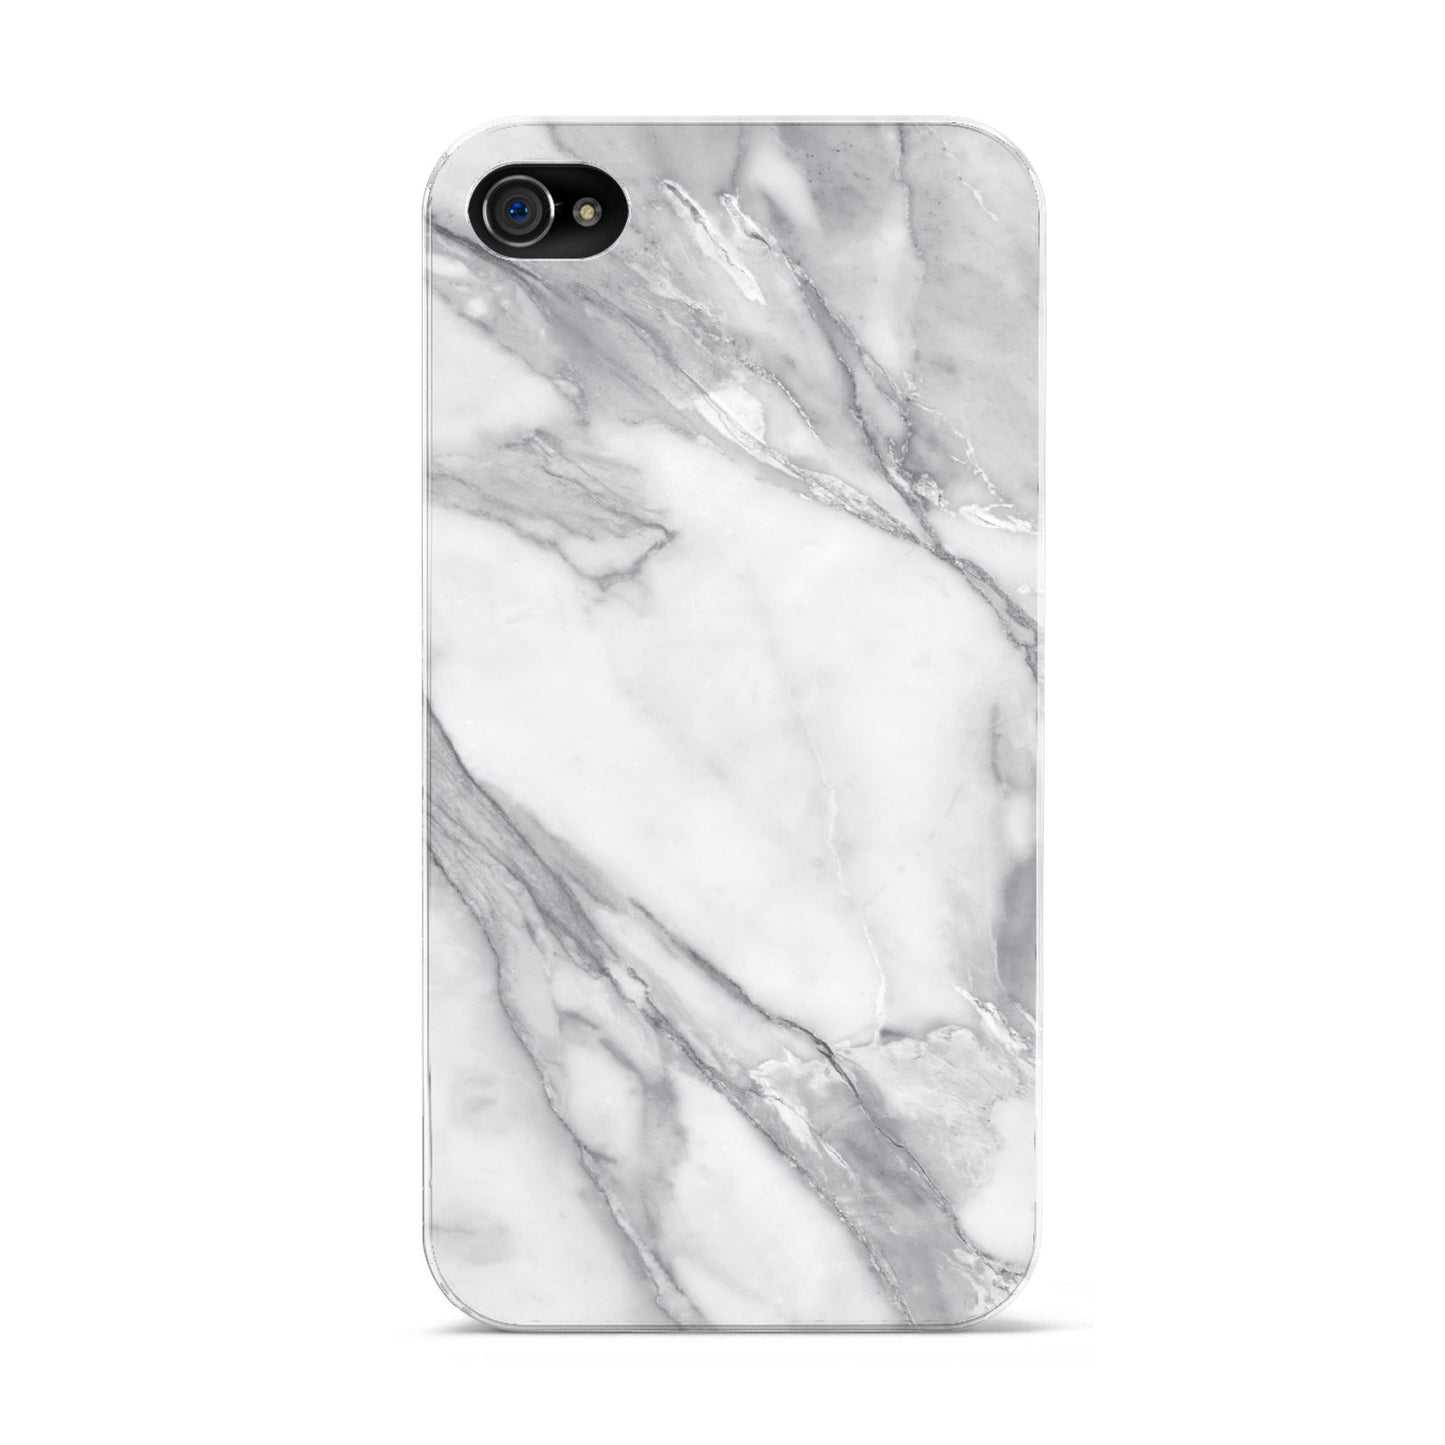 Faux Marble Effect White Grey Apple iPhone 4s Case